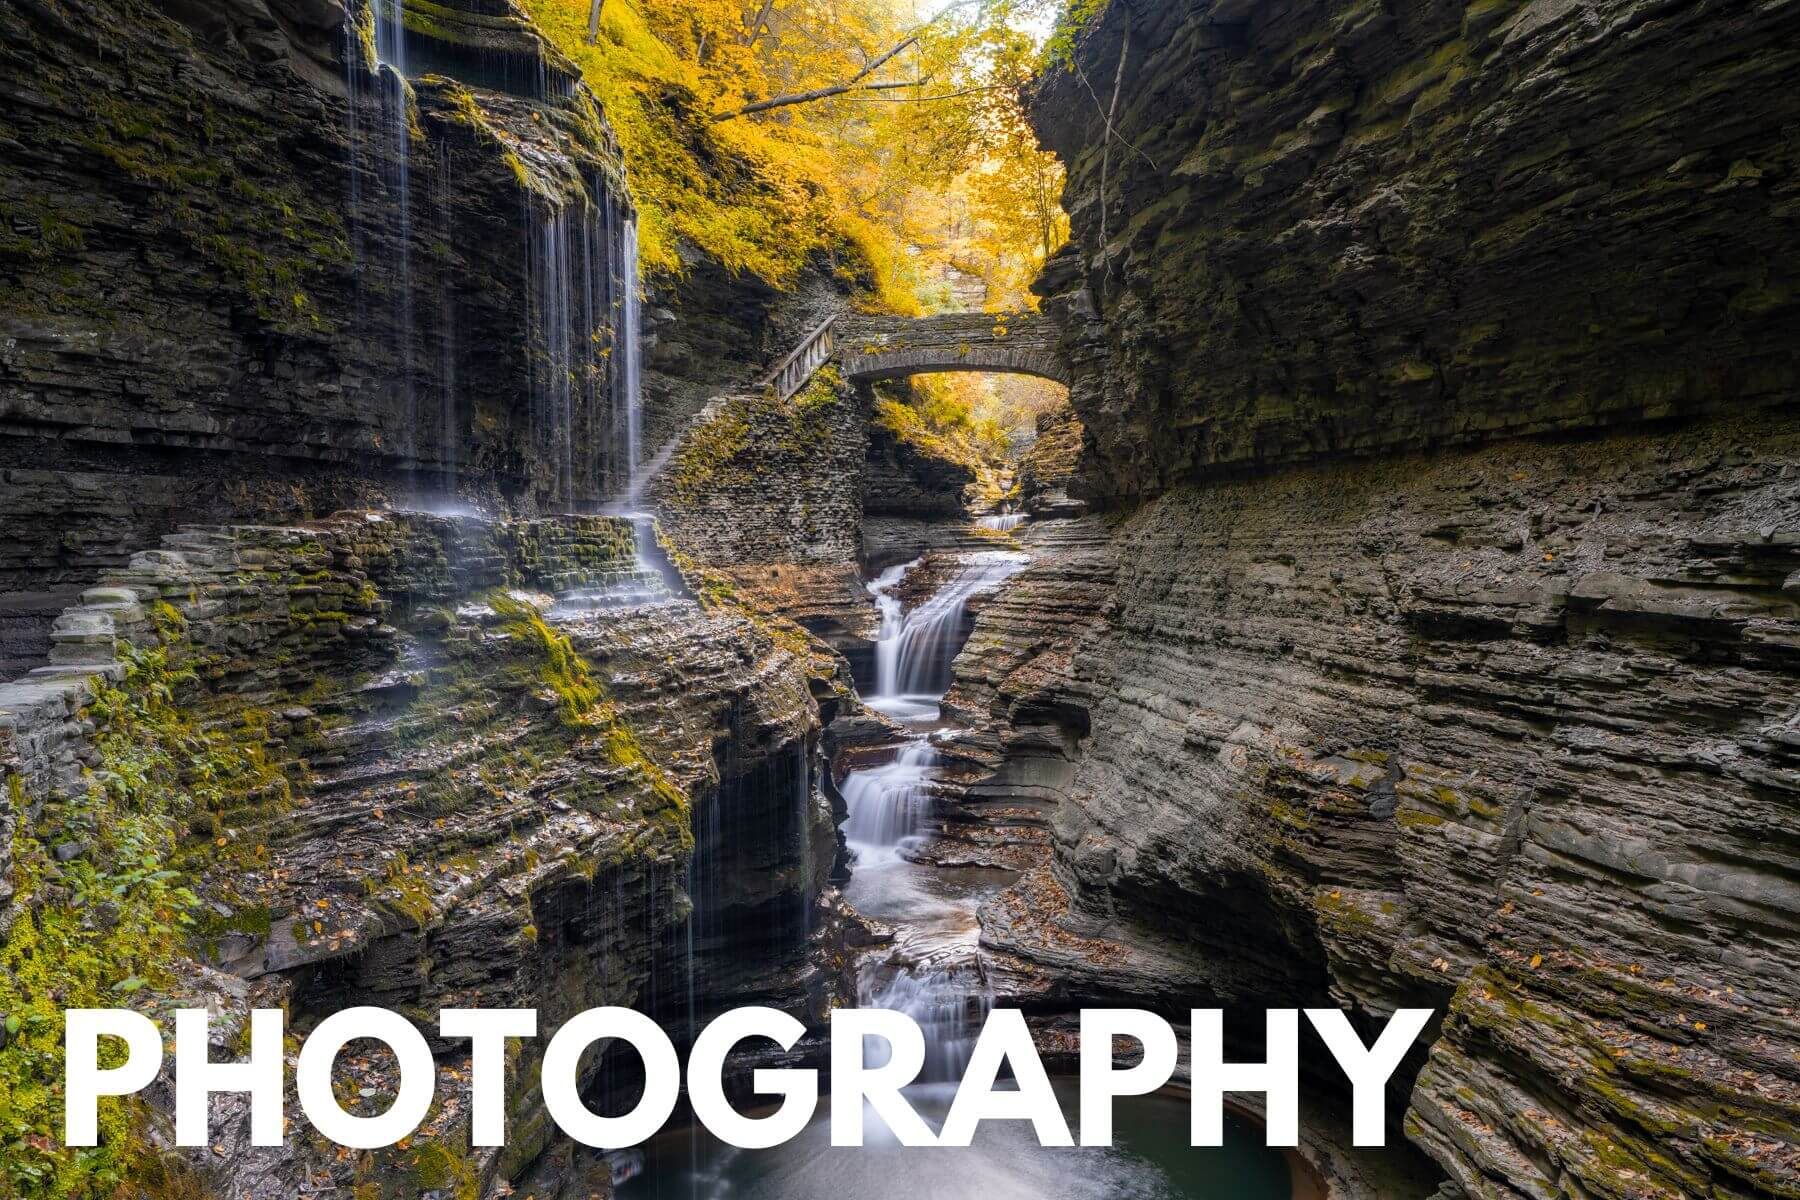 Photo of small waterfalls flowing through a narrow but scenic creek in Watkins Glen NY with the word Photography overlaid